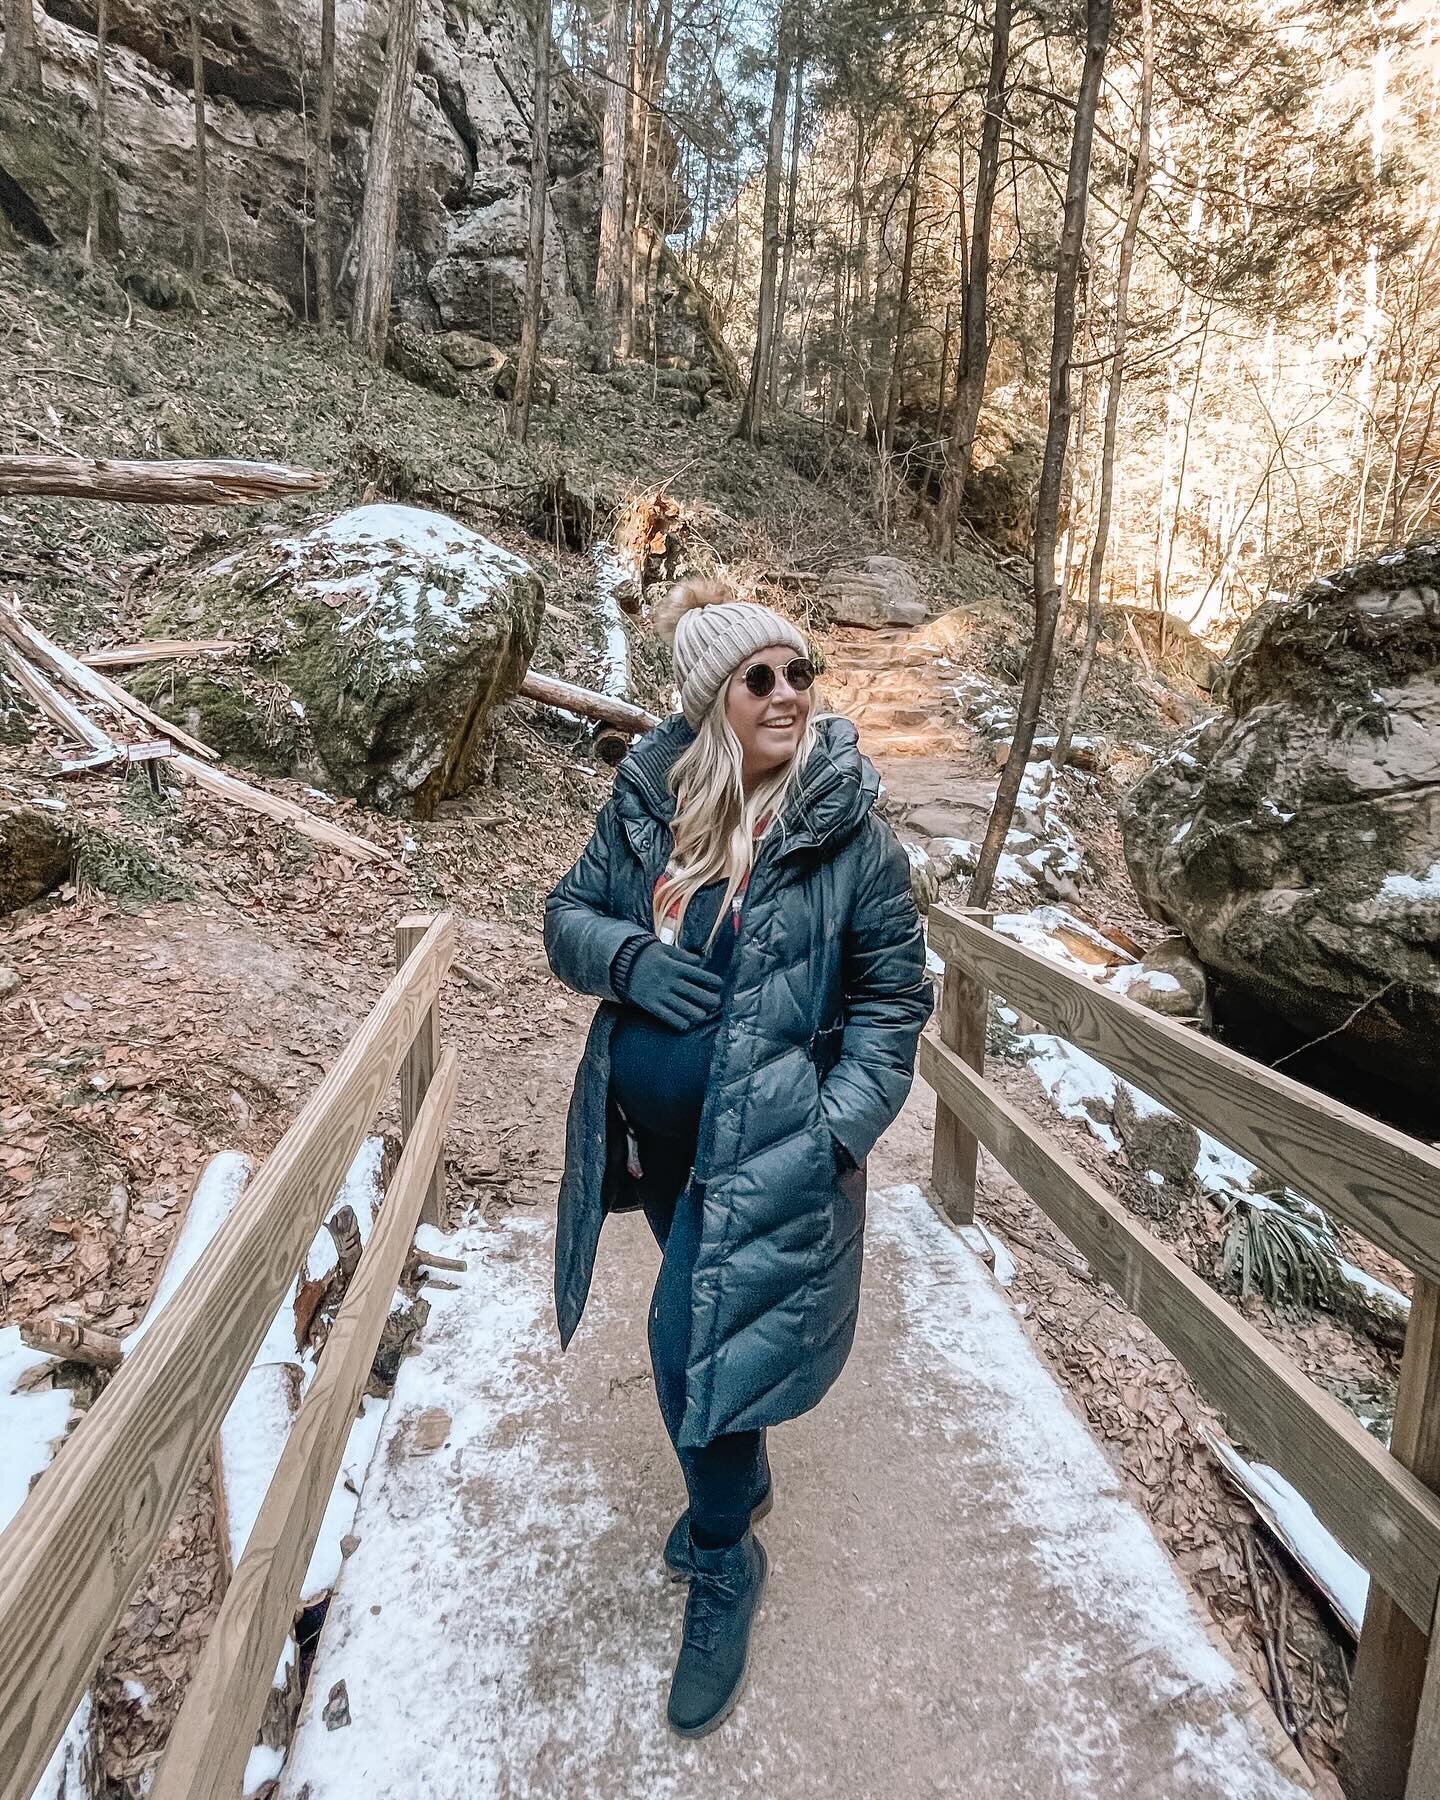 Got winter getaway plans? ❄️

Save this for later when planning your trip. 

Throwing it back to our last trip just before Beau was born to Hocking Hills, Ohio.

We spent the entire weekend eating, hiking and relaxing by Lake Logan.

🏡 Stay: @hockin